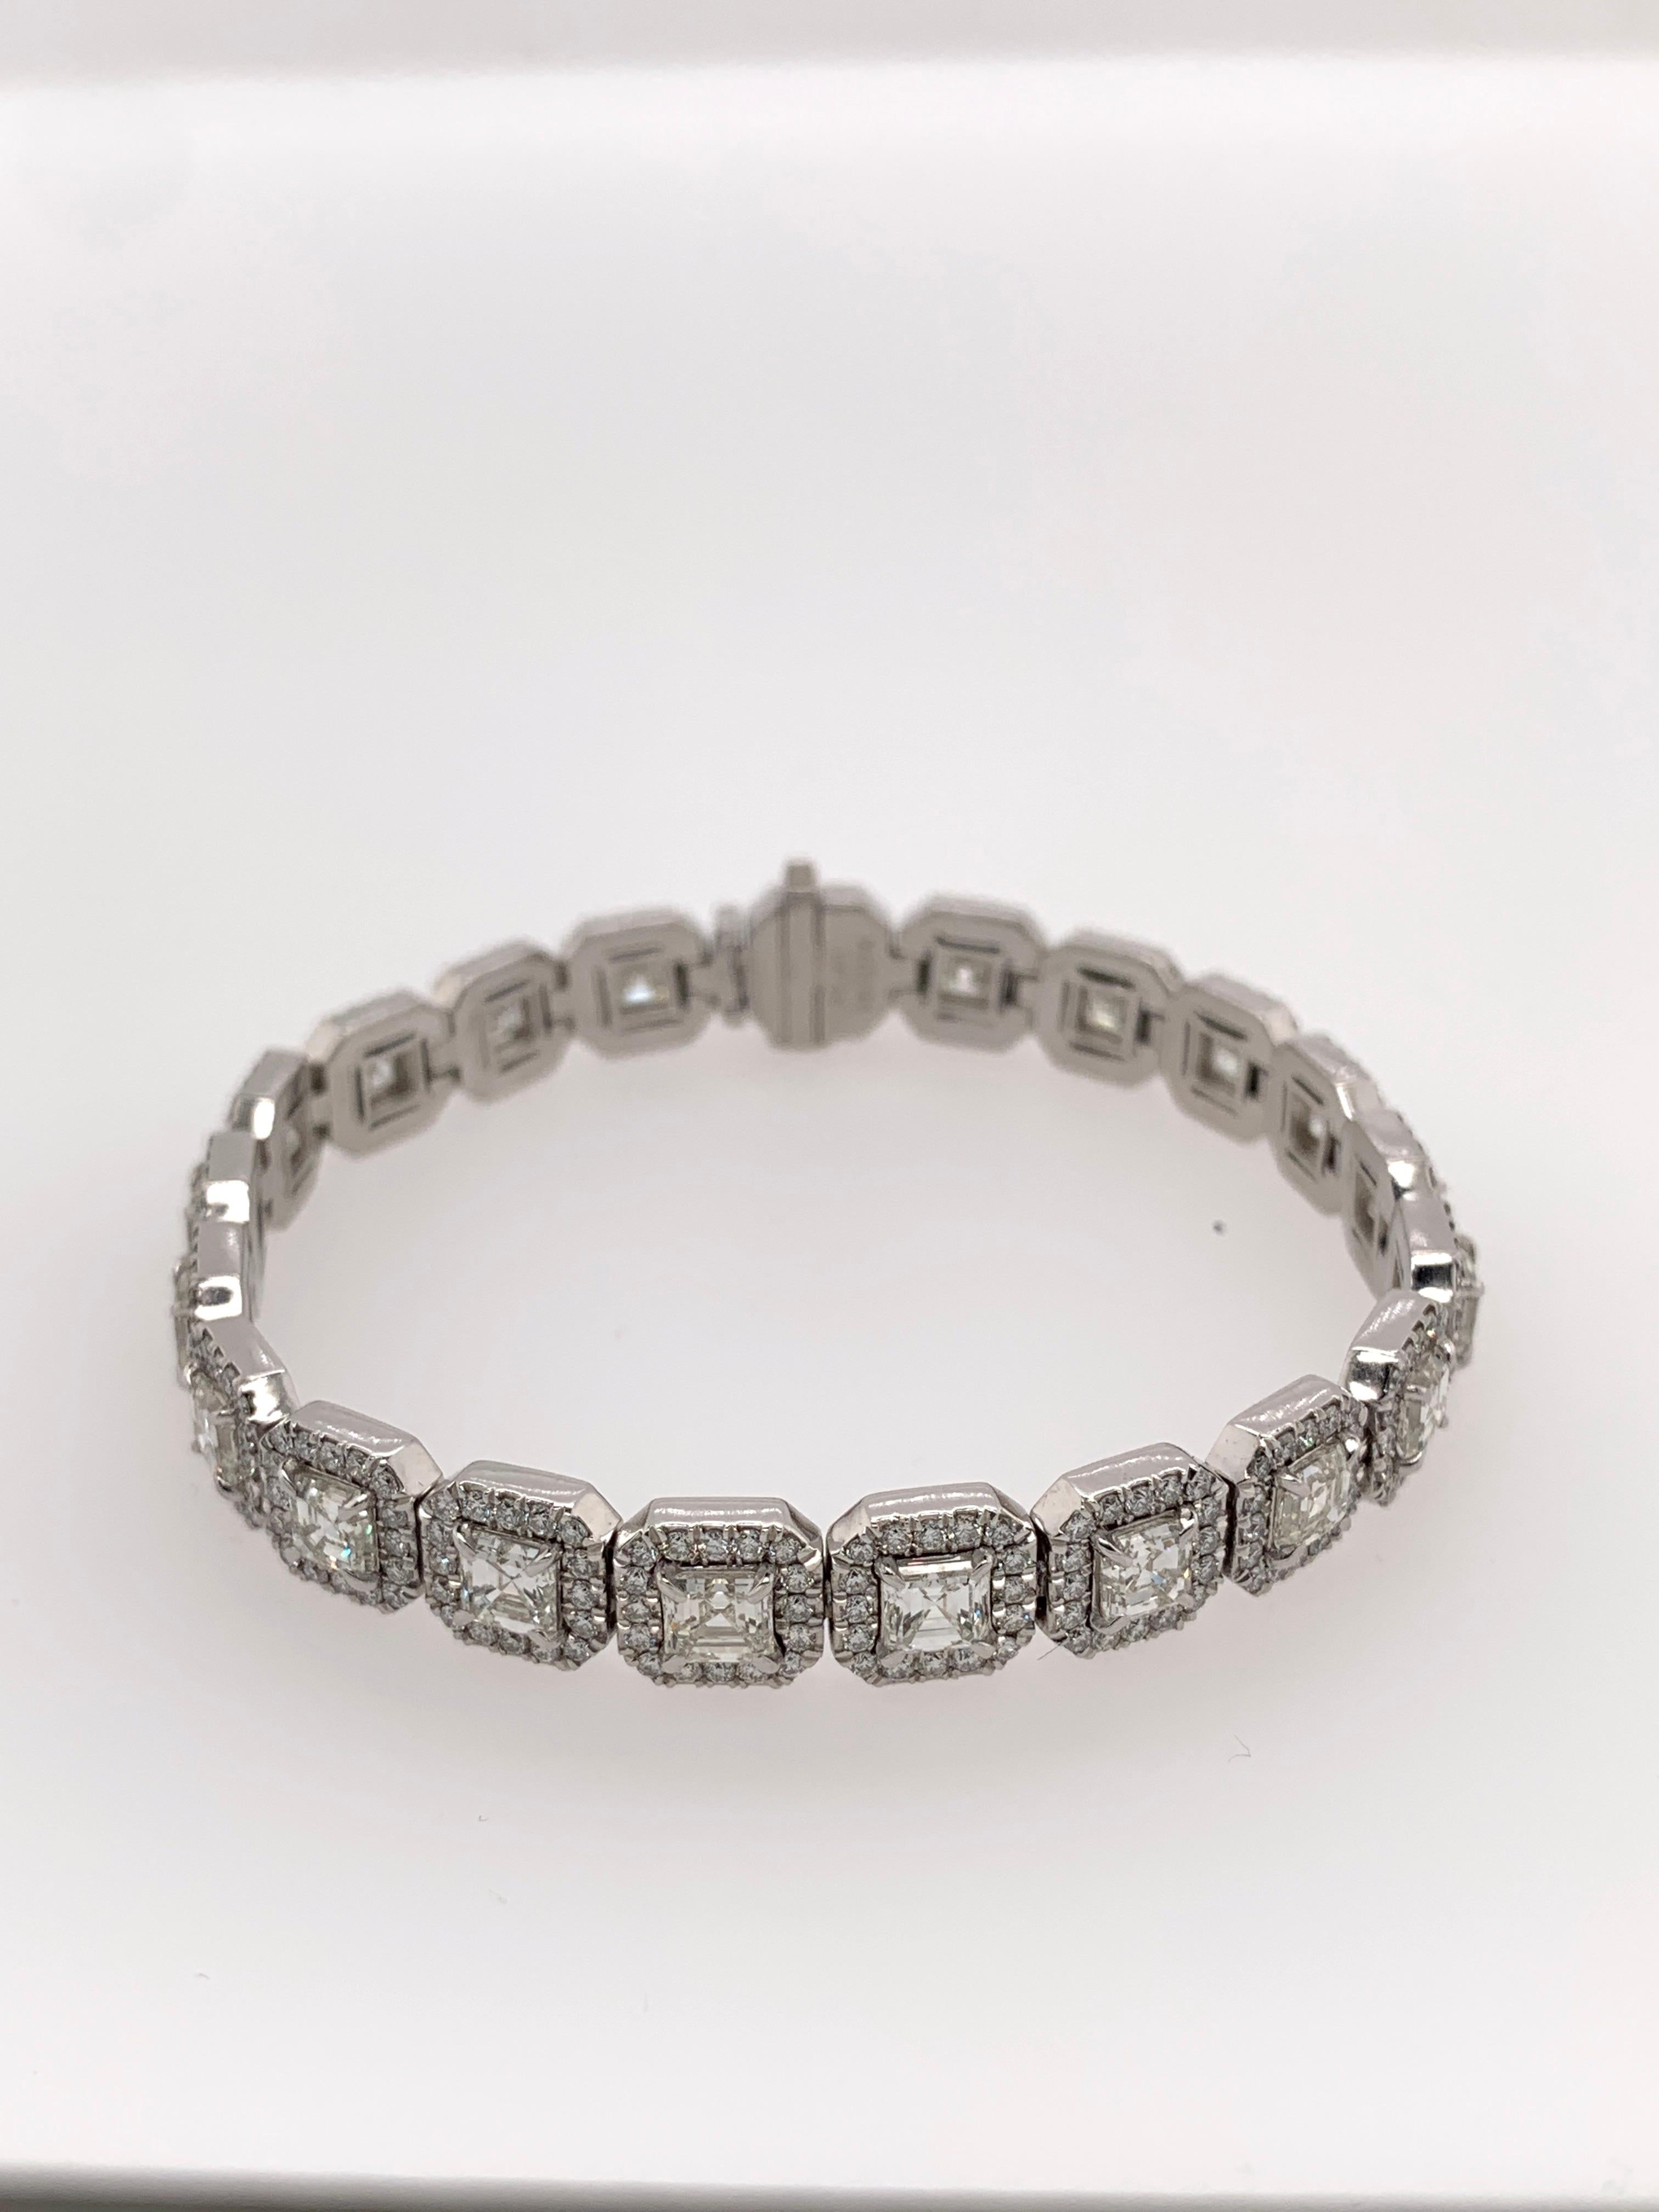 Asscher Cut White Diamond Halo Tennis Bracelet
White Diamonds set on White Gold.
Crafted to order. Please allow up to 3 weeks for delivery.